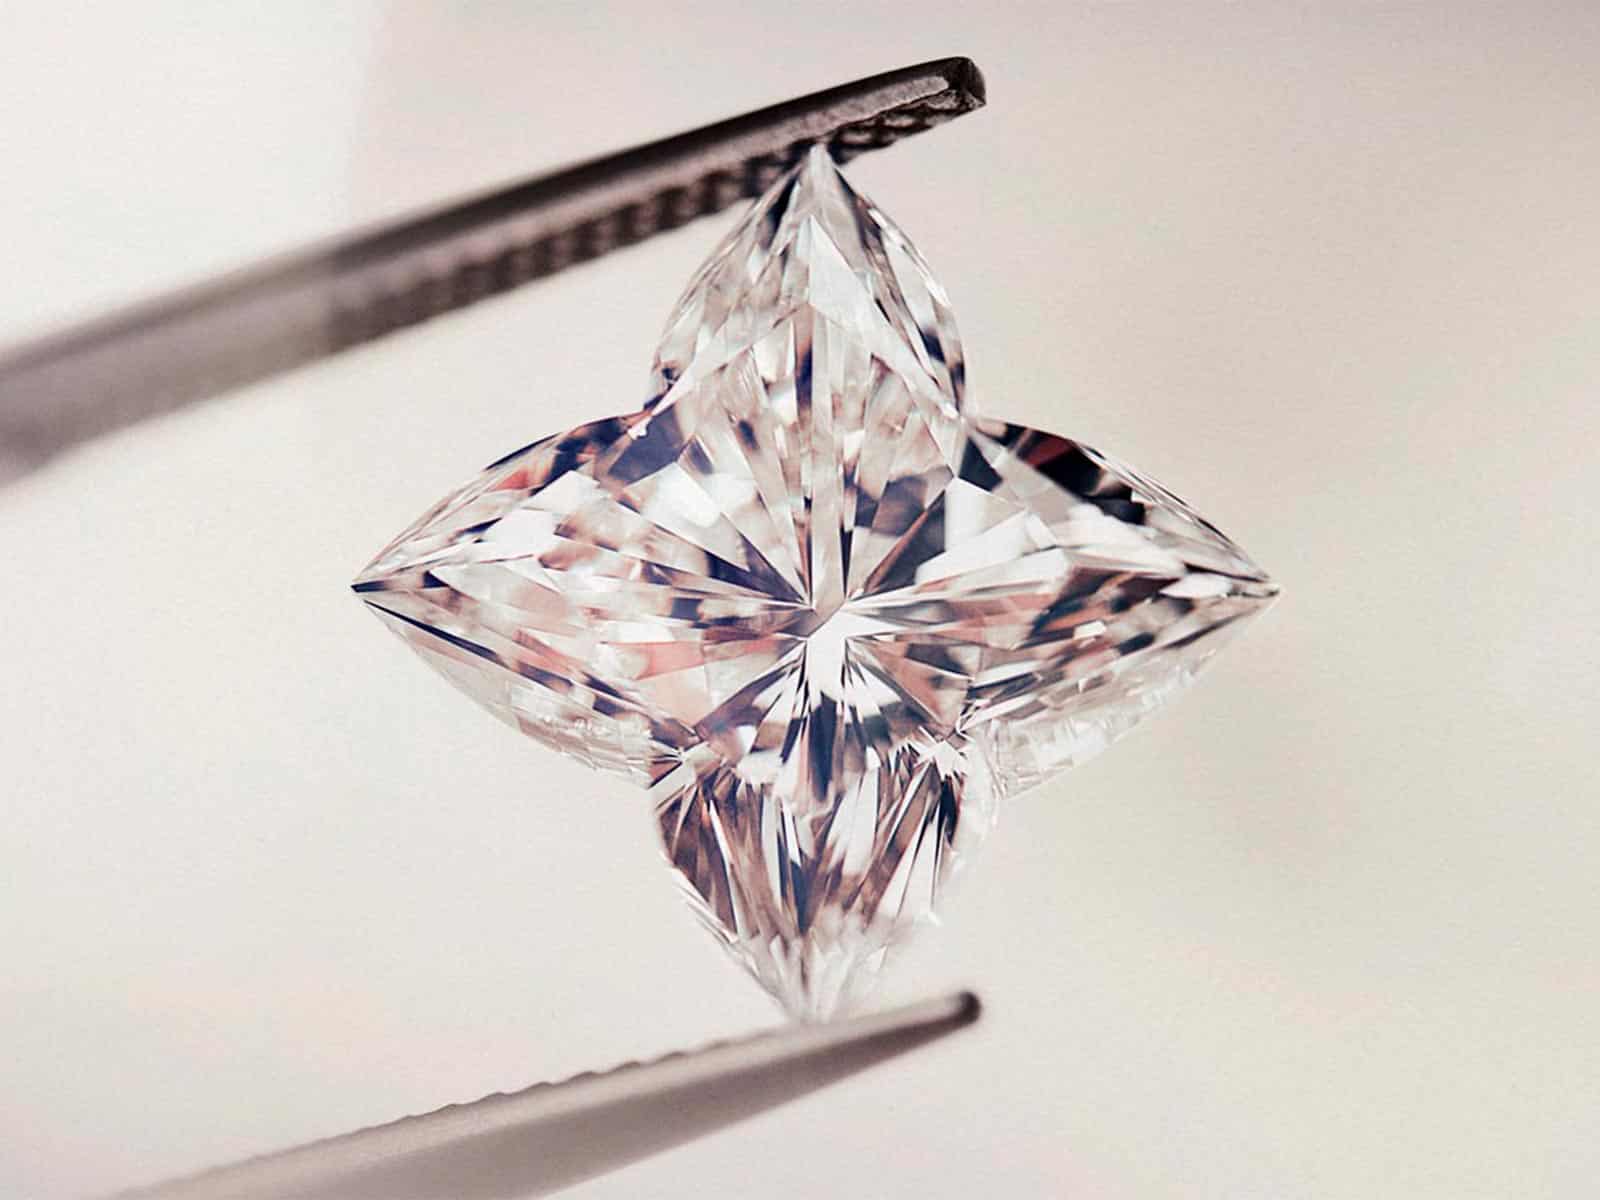 LV Diamonds is Louis Vuitton’s new fine jewellery collection